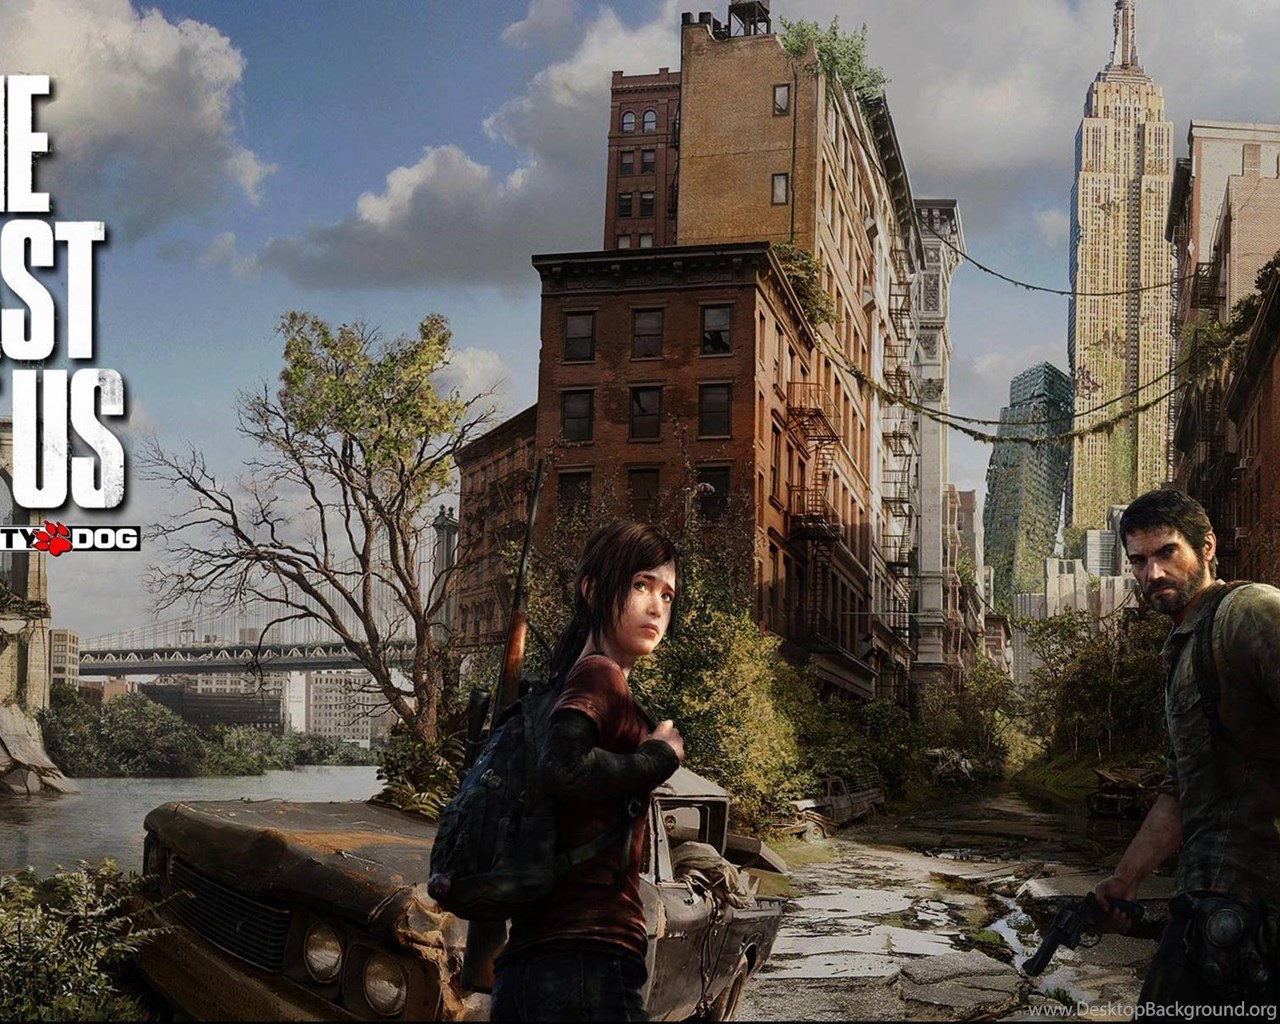 Town of us 3 3 1. The last of us 2 город. The last of us город. The last of us 2 пейзажи. Мир the last of us.